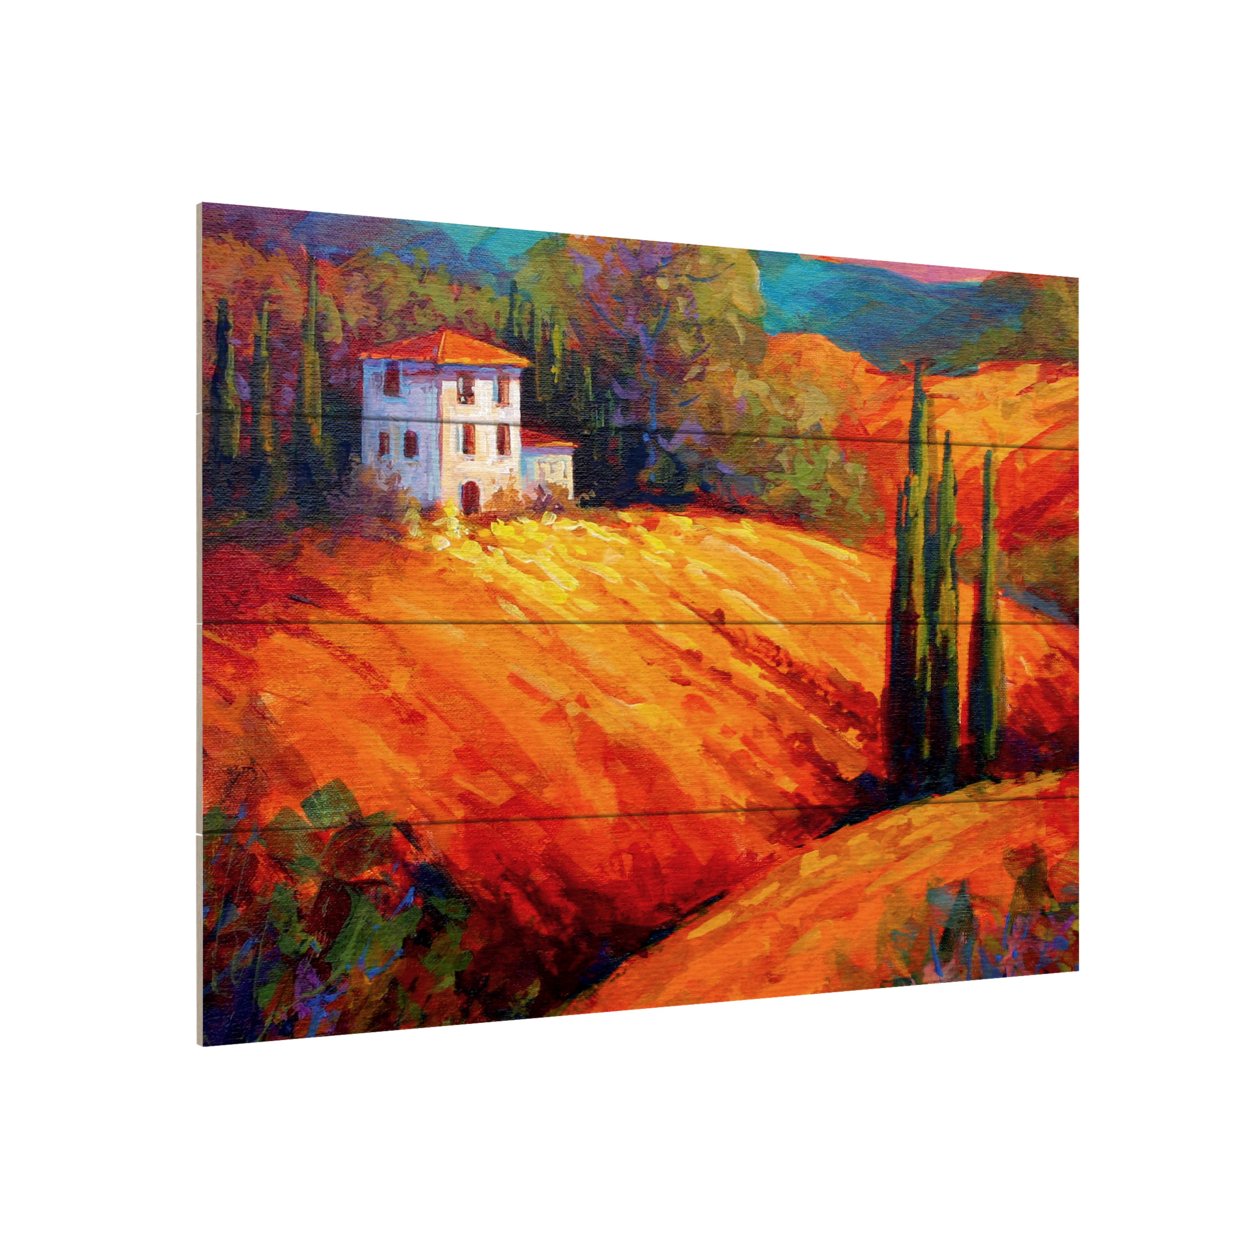 Wall Art 12 X 16 Inches Titled Tuscan Villa Evening Ready To Hang Printed On Wooden Planks